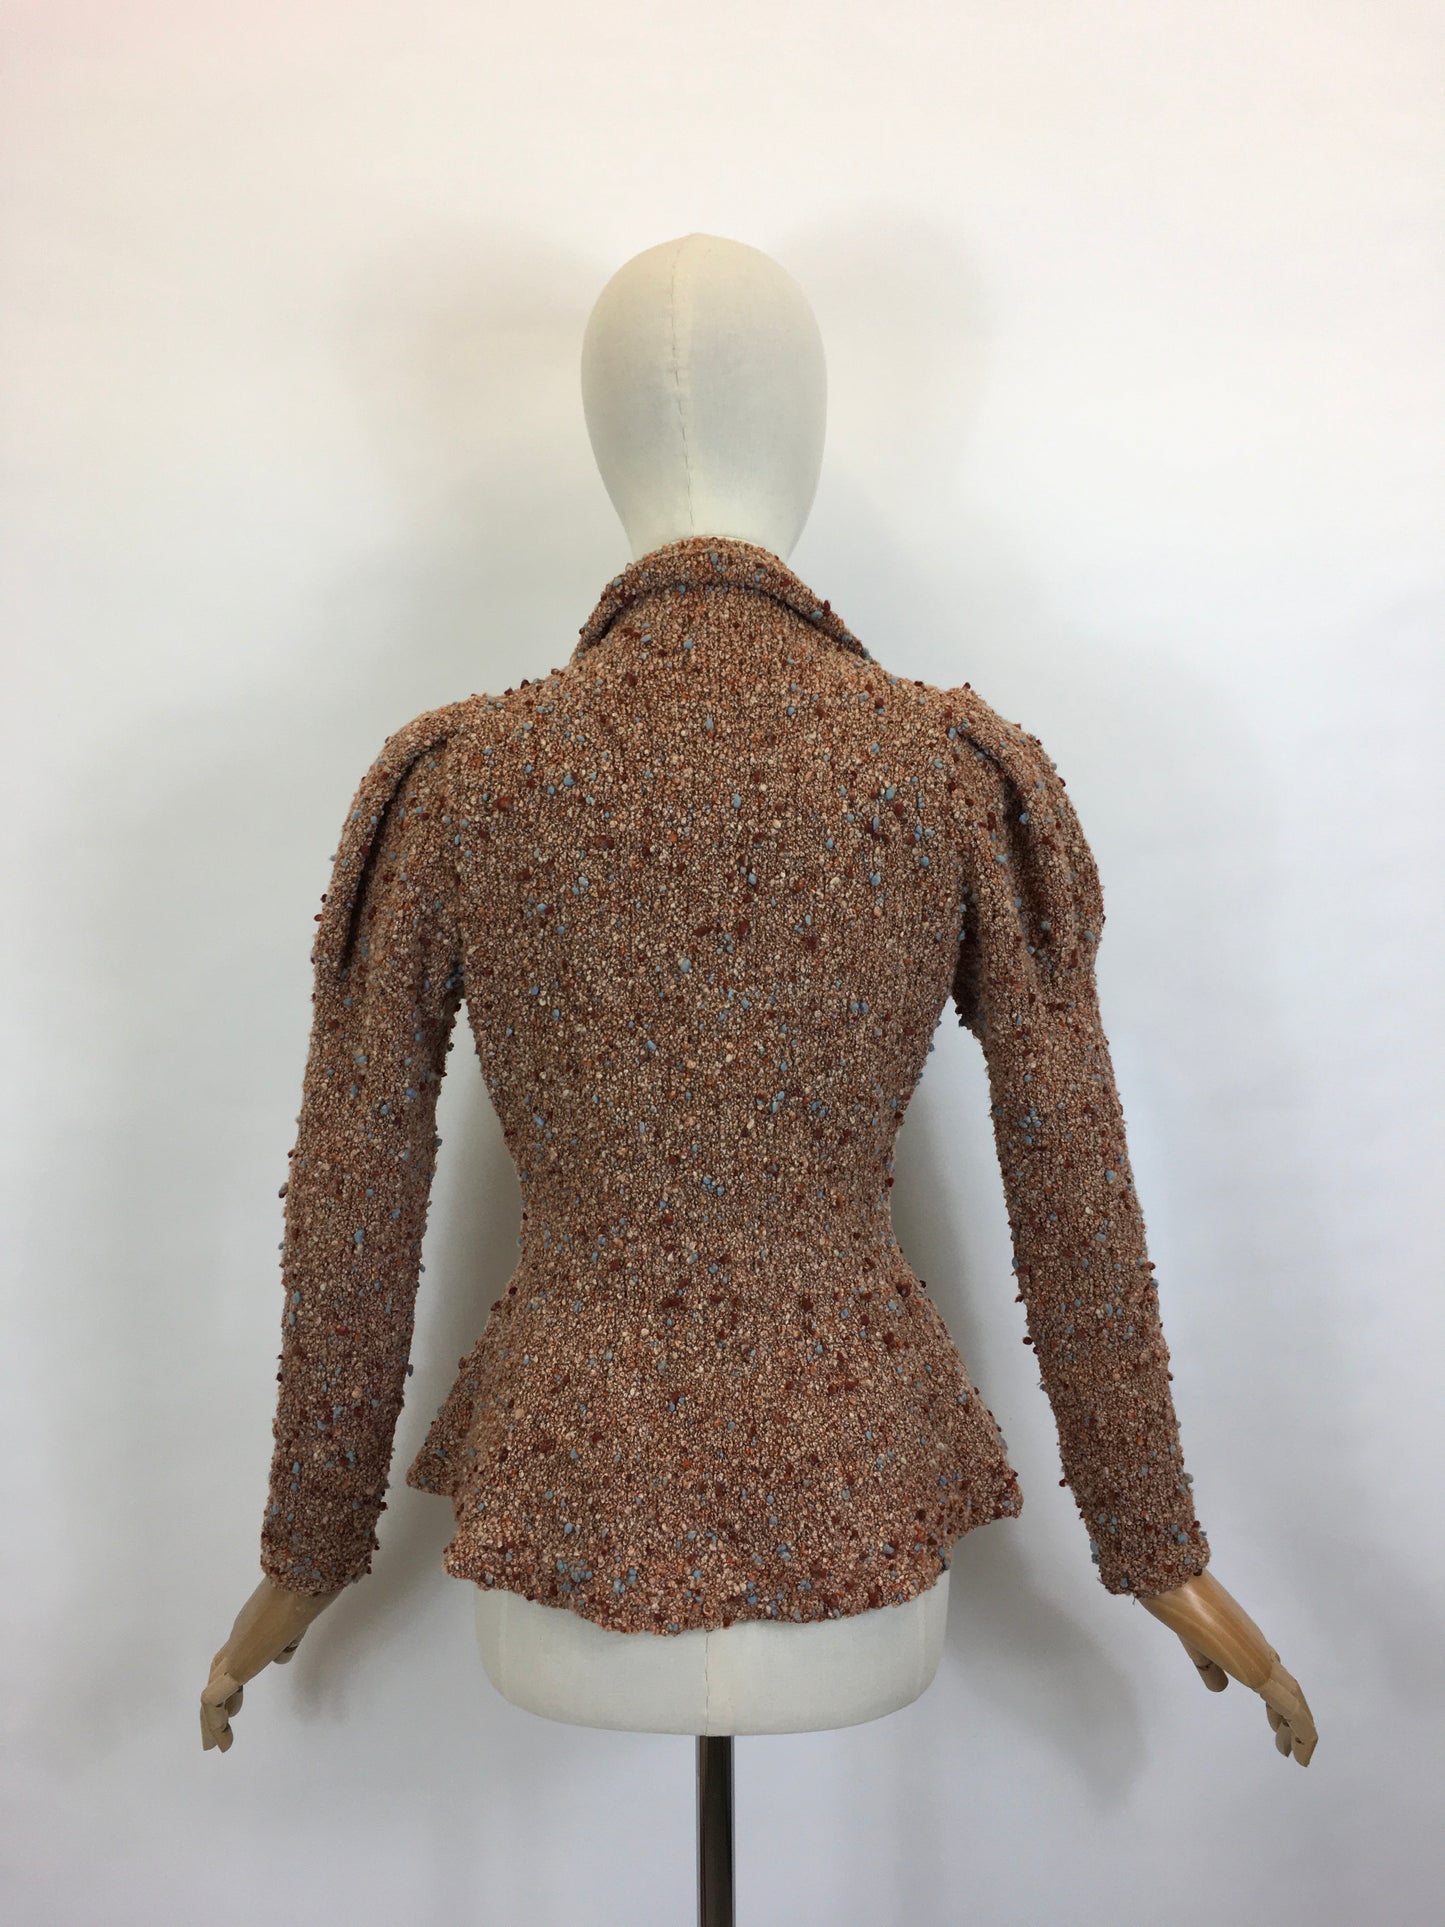 Original Late 1930’s Early 1940’s Knitted Cardigan / Jacket - In Pumpkin Spice, Soft Peach, Cinnamon and Powder Blue